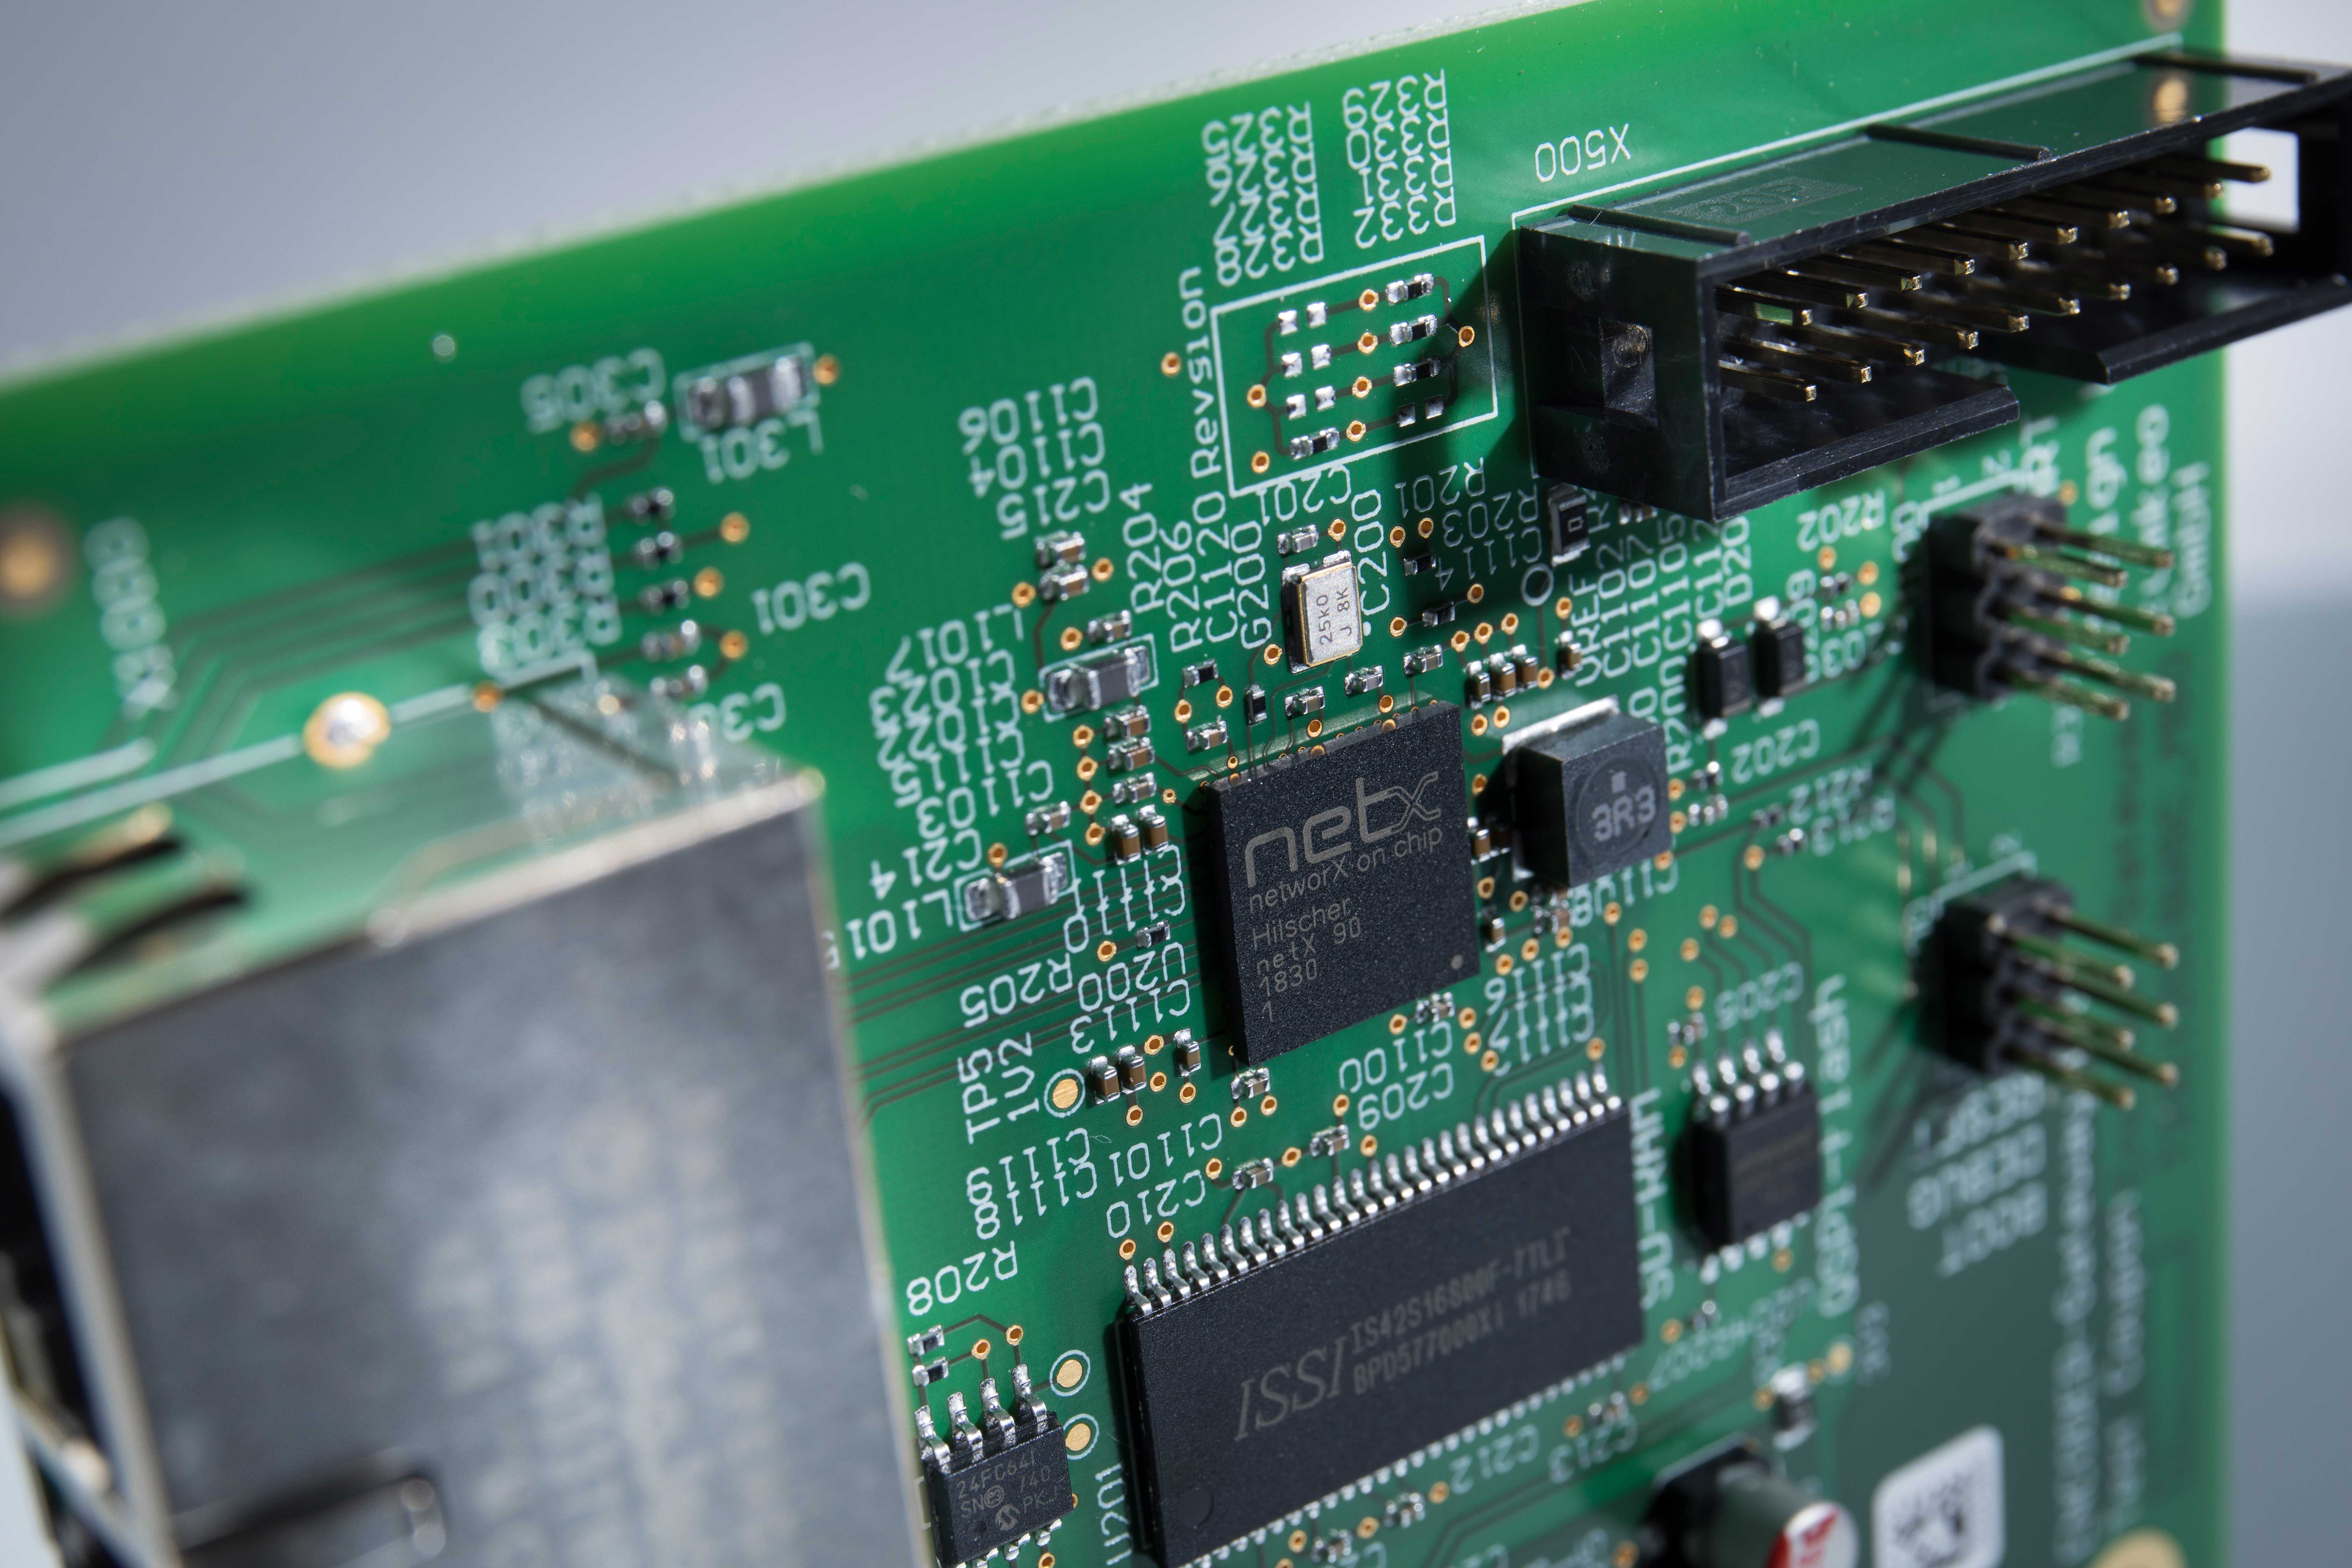 A black netX 90 chip mounted on a green PCB.